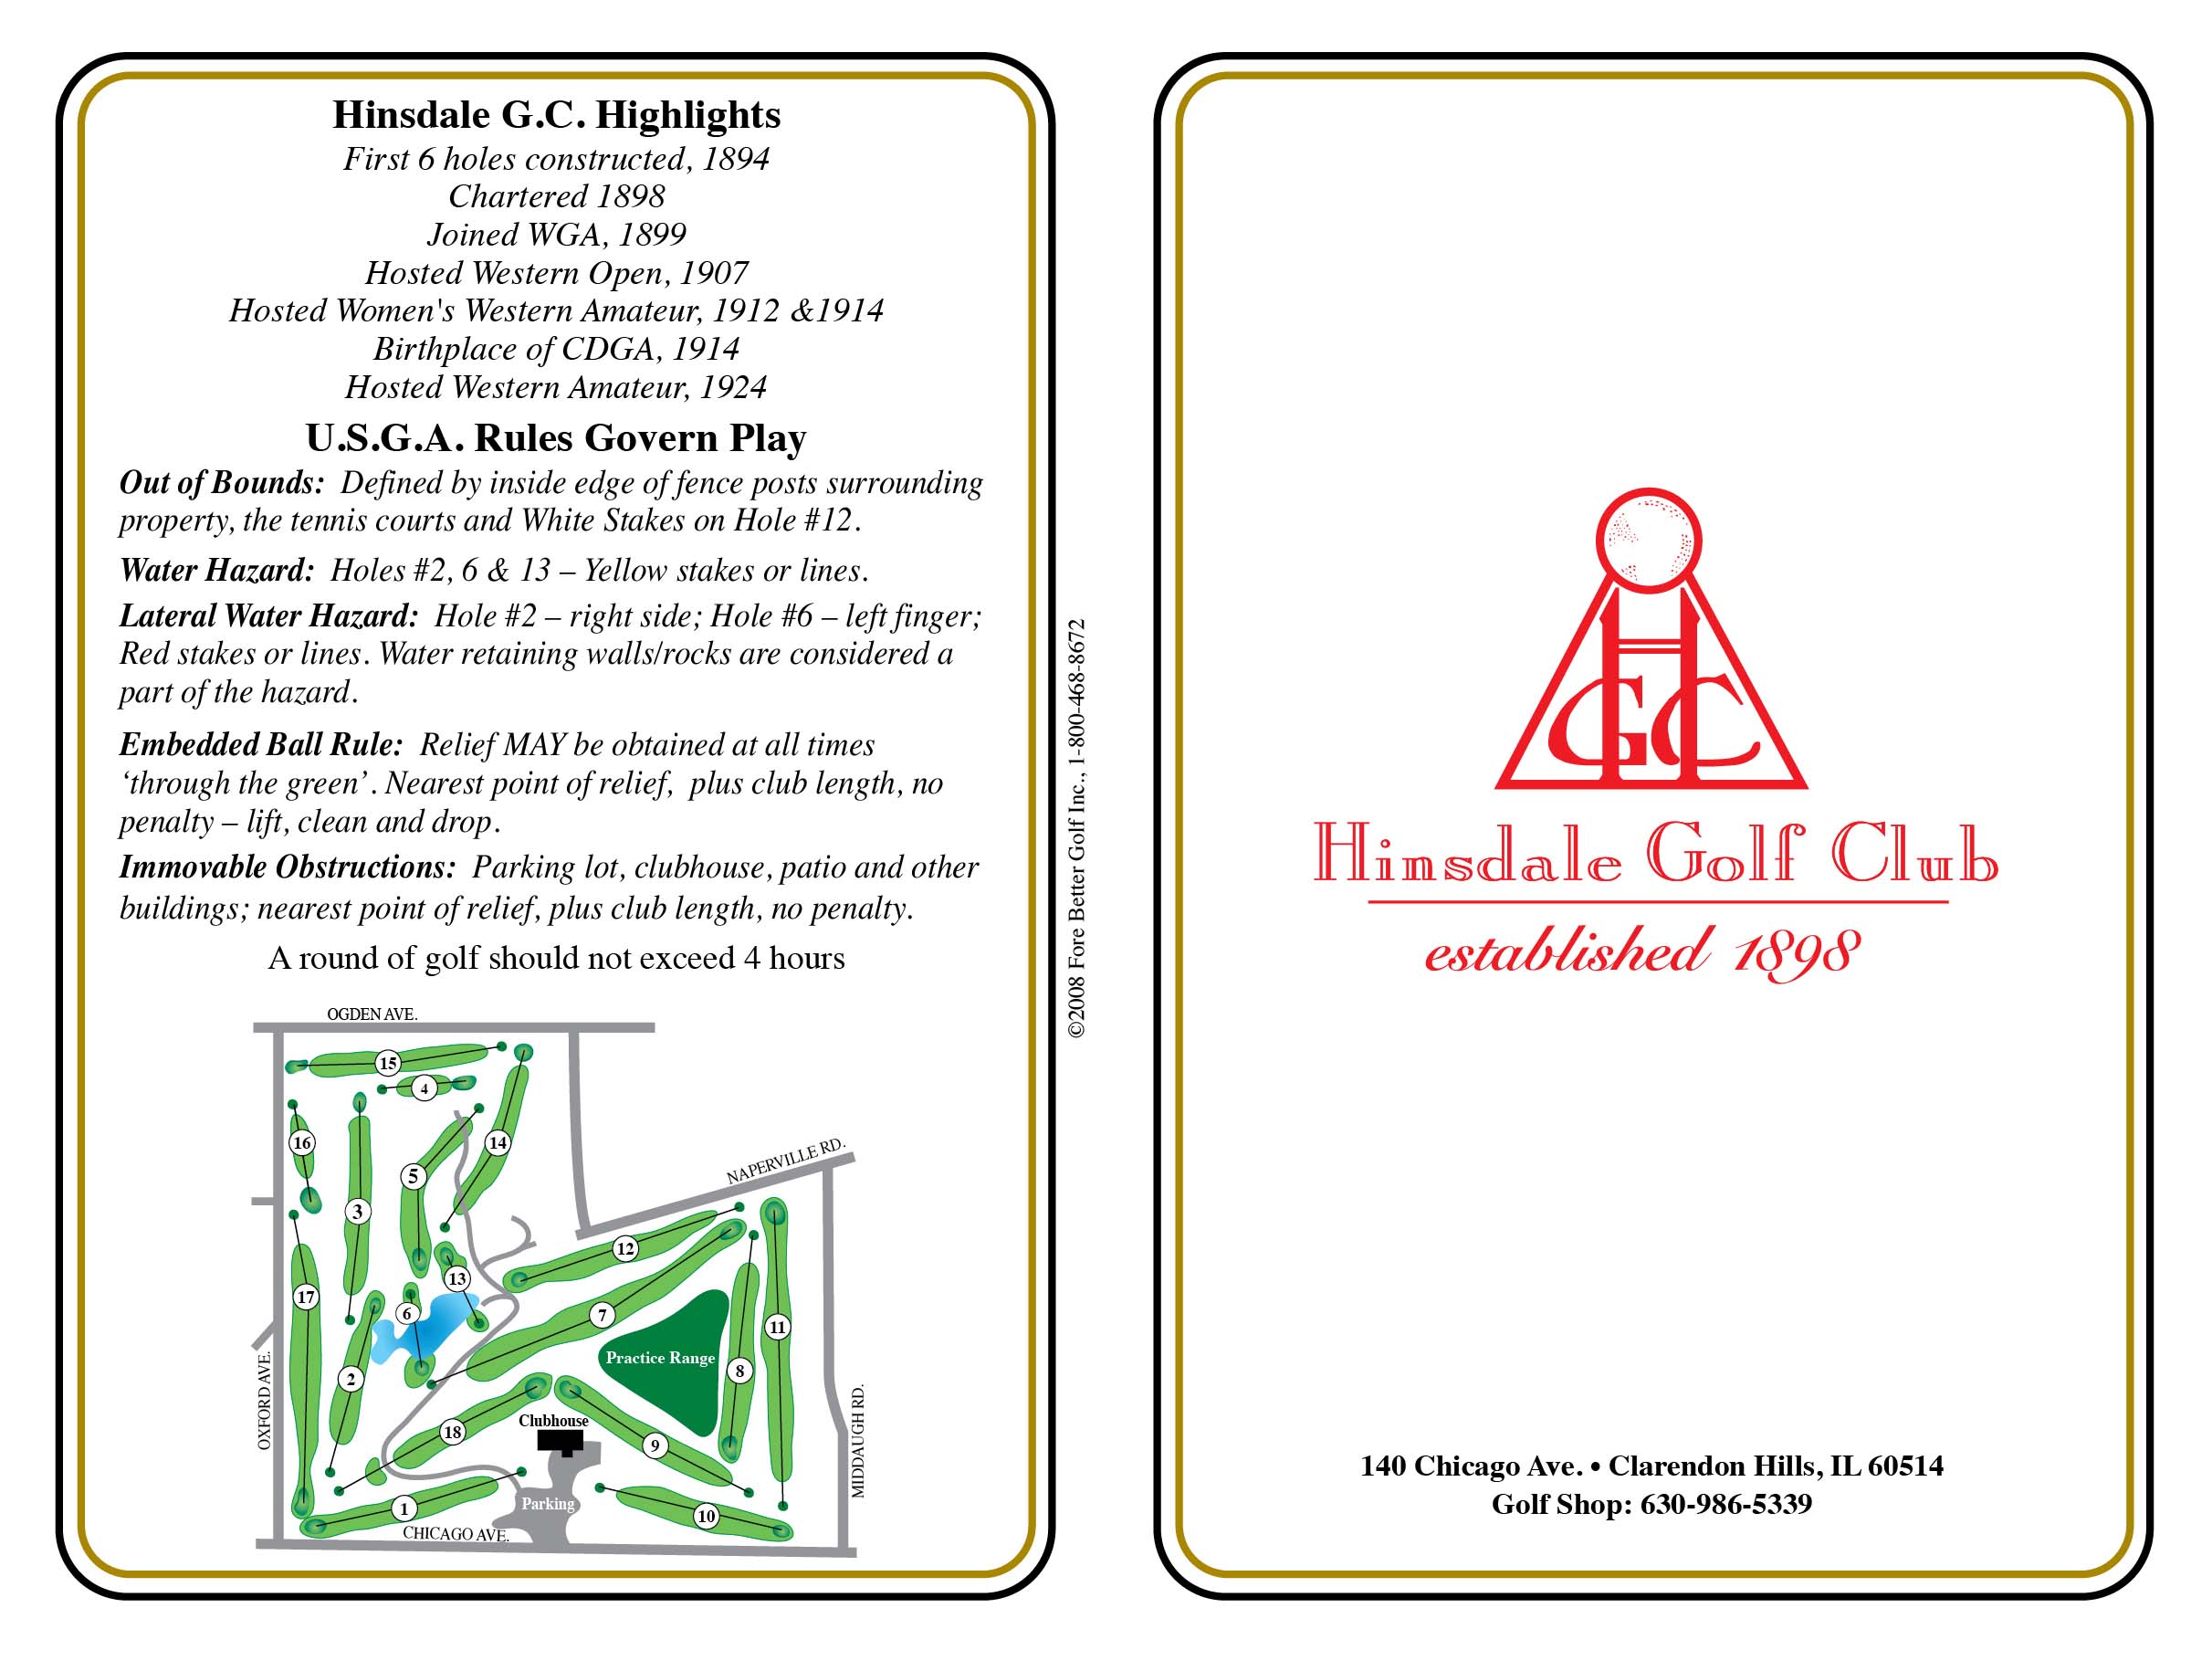 Hinsdale GC